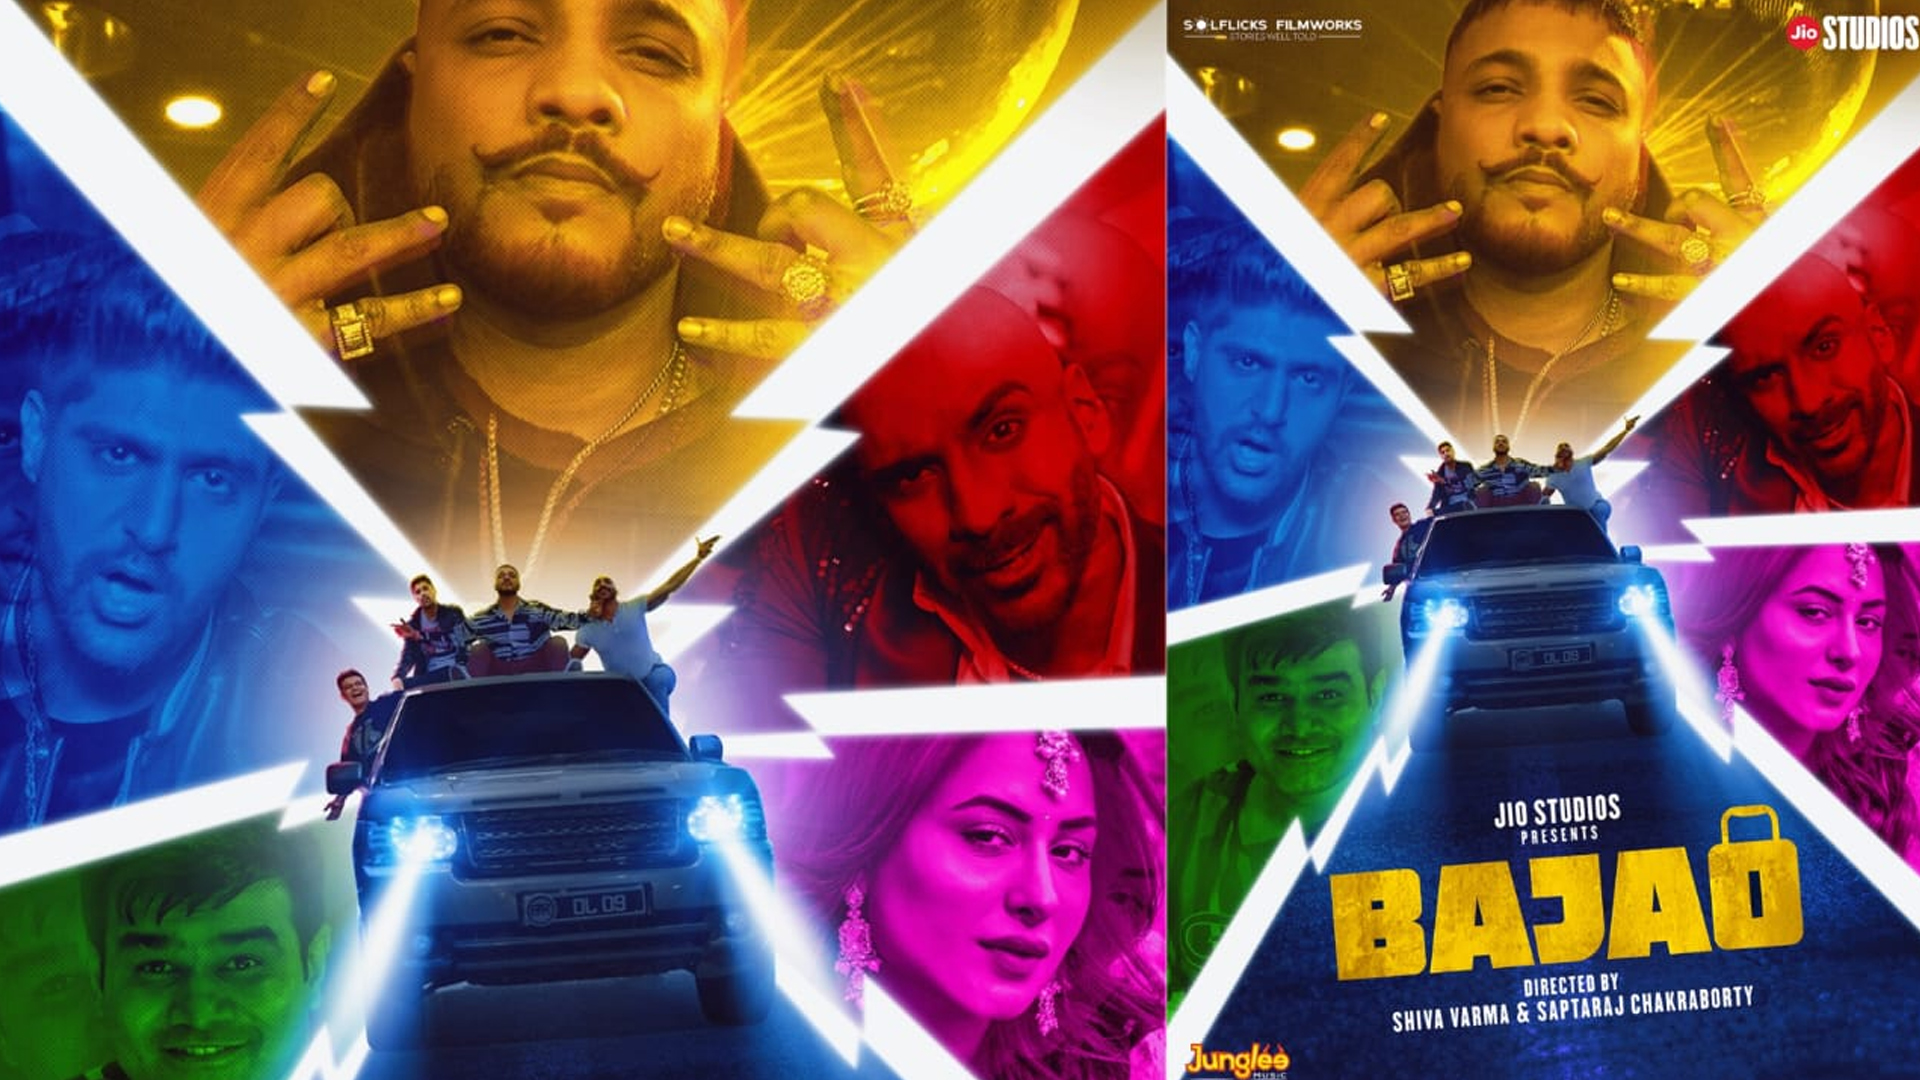 Get ready for a musical adventure with Bajao!